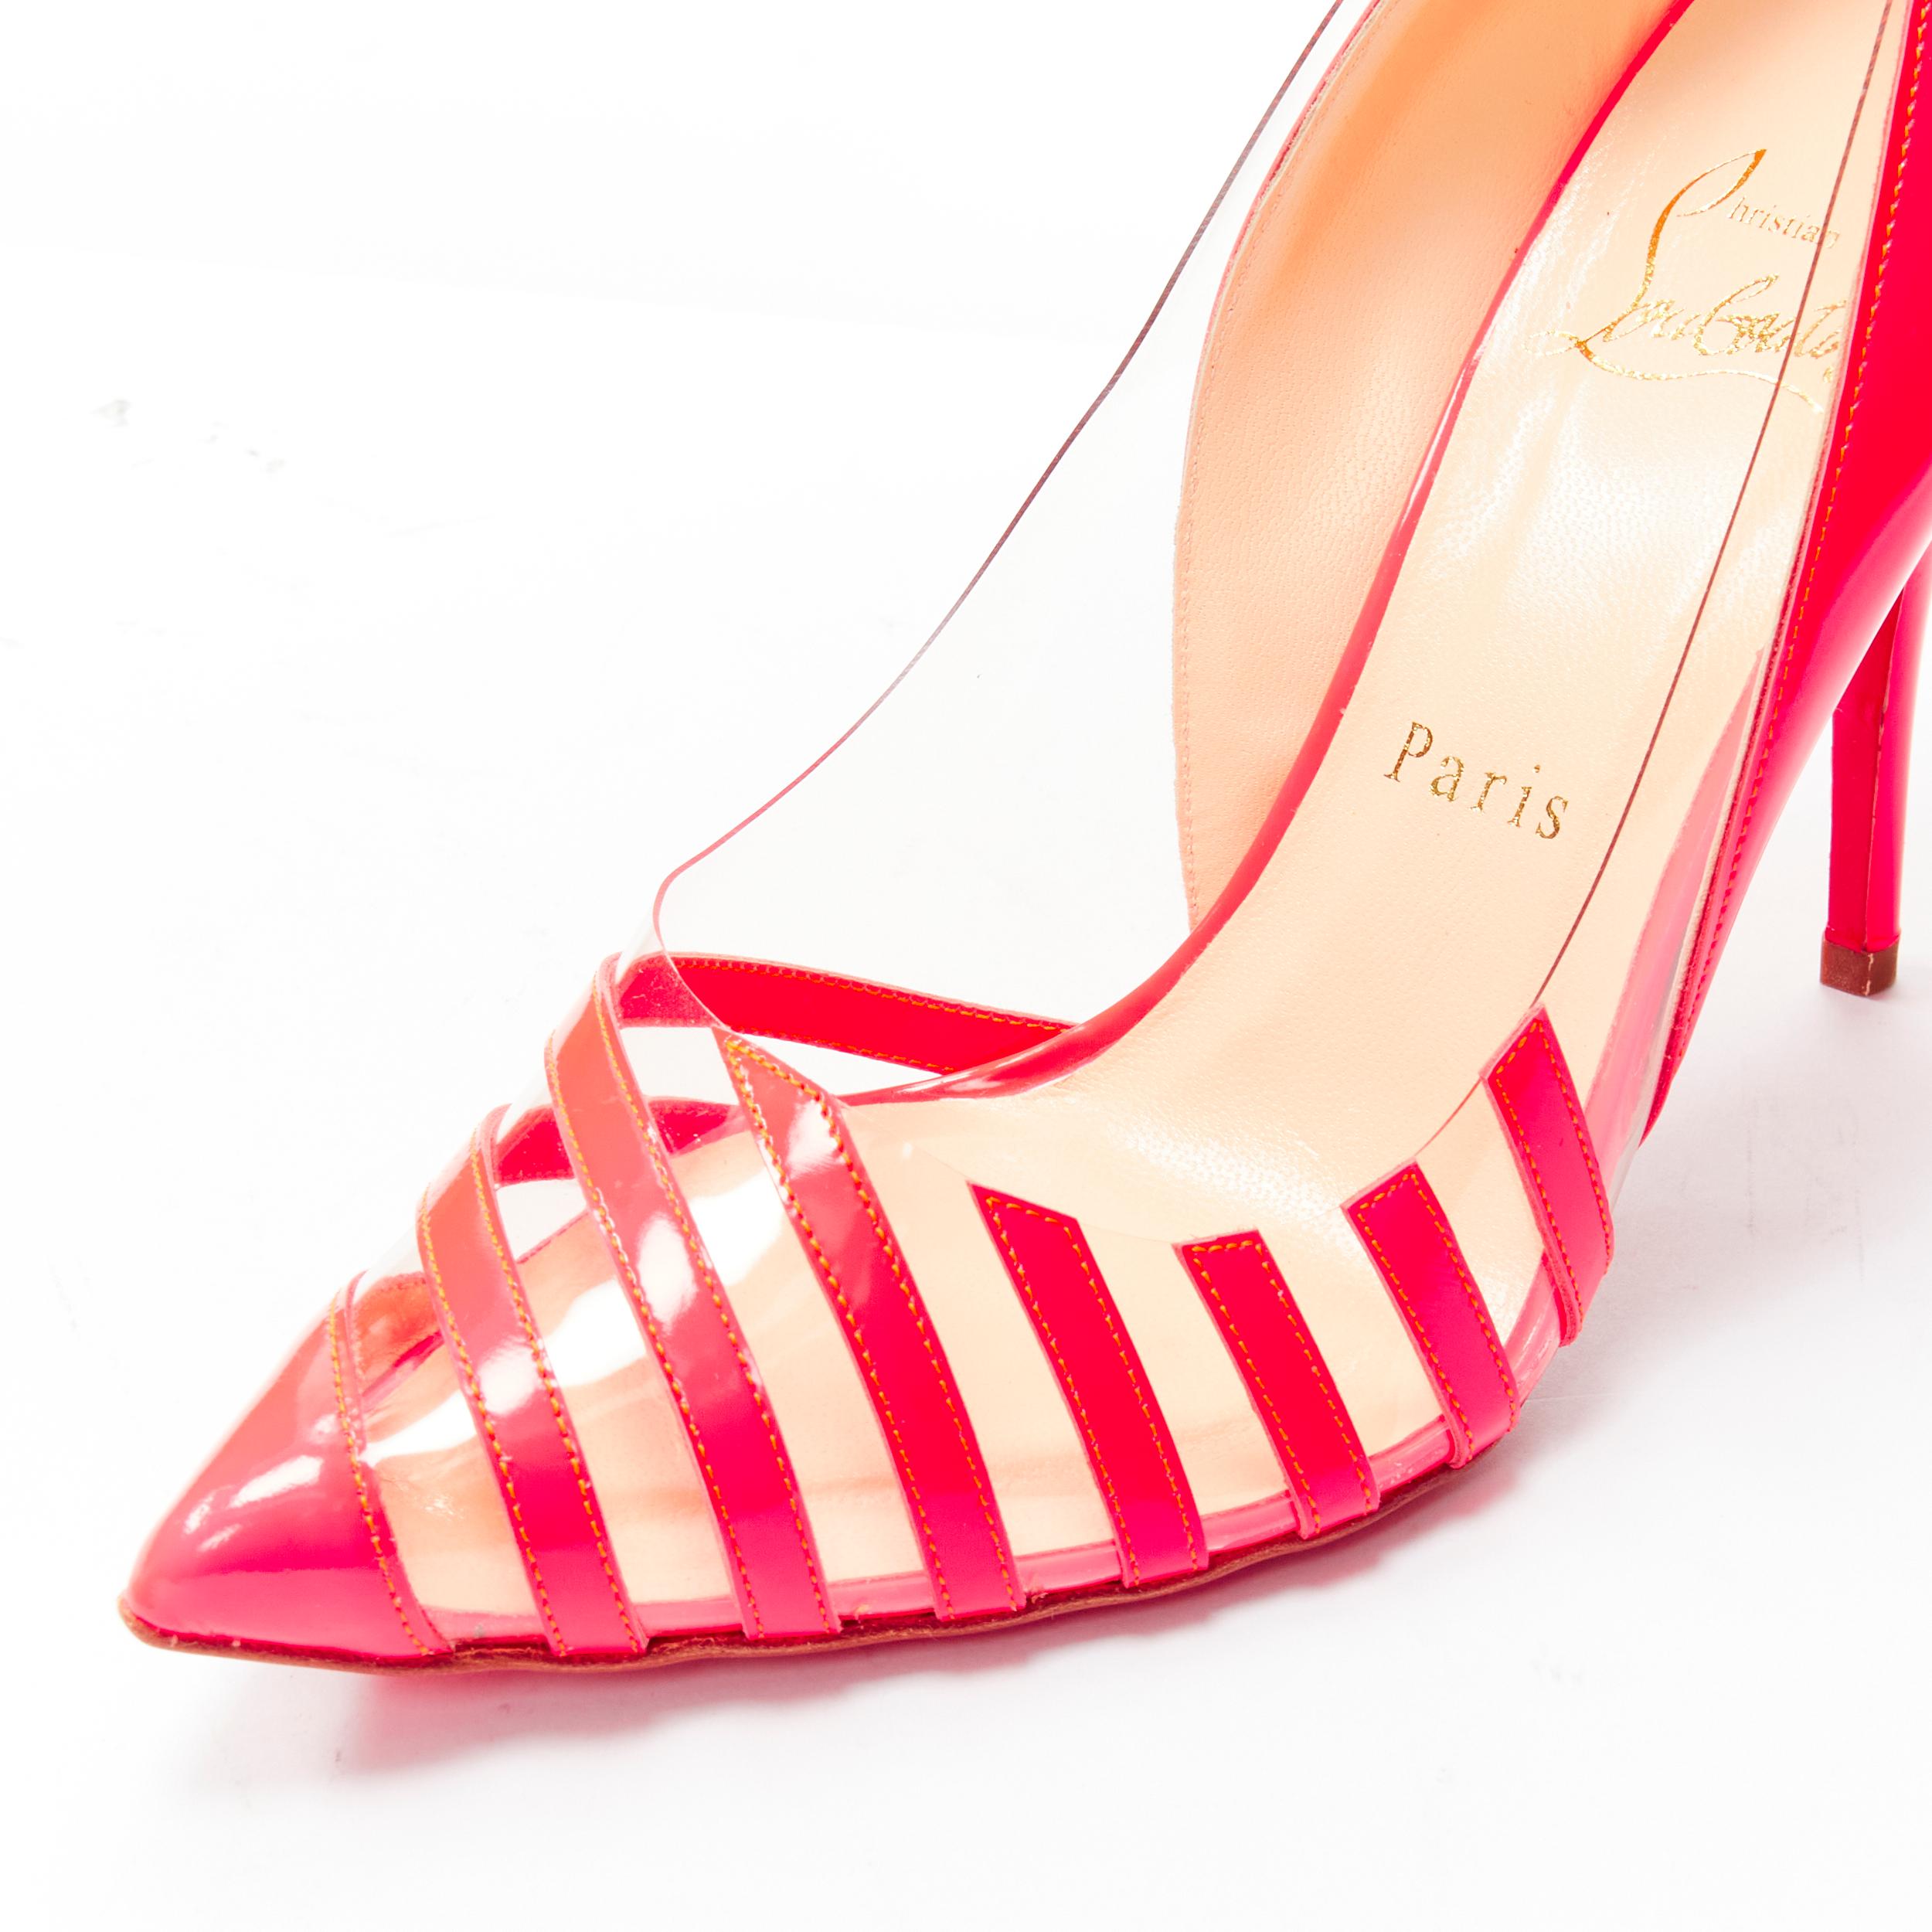 CHRISTIAN LOUBOUTIN Pivichic 100 neon pink striped patent pigalle pump EU37.5 For Sale 2